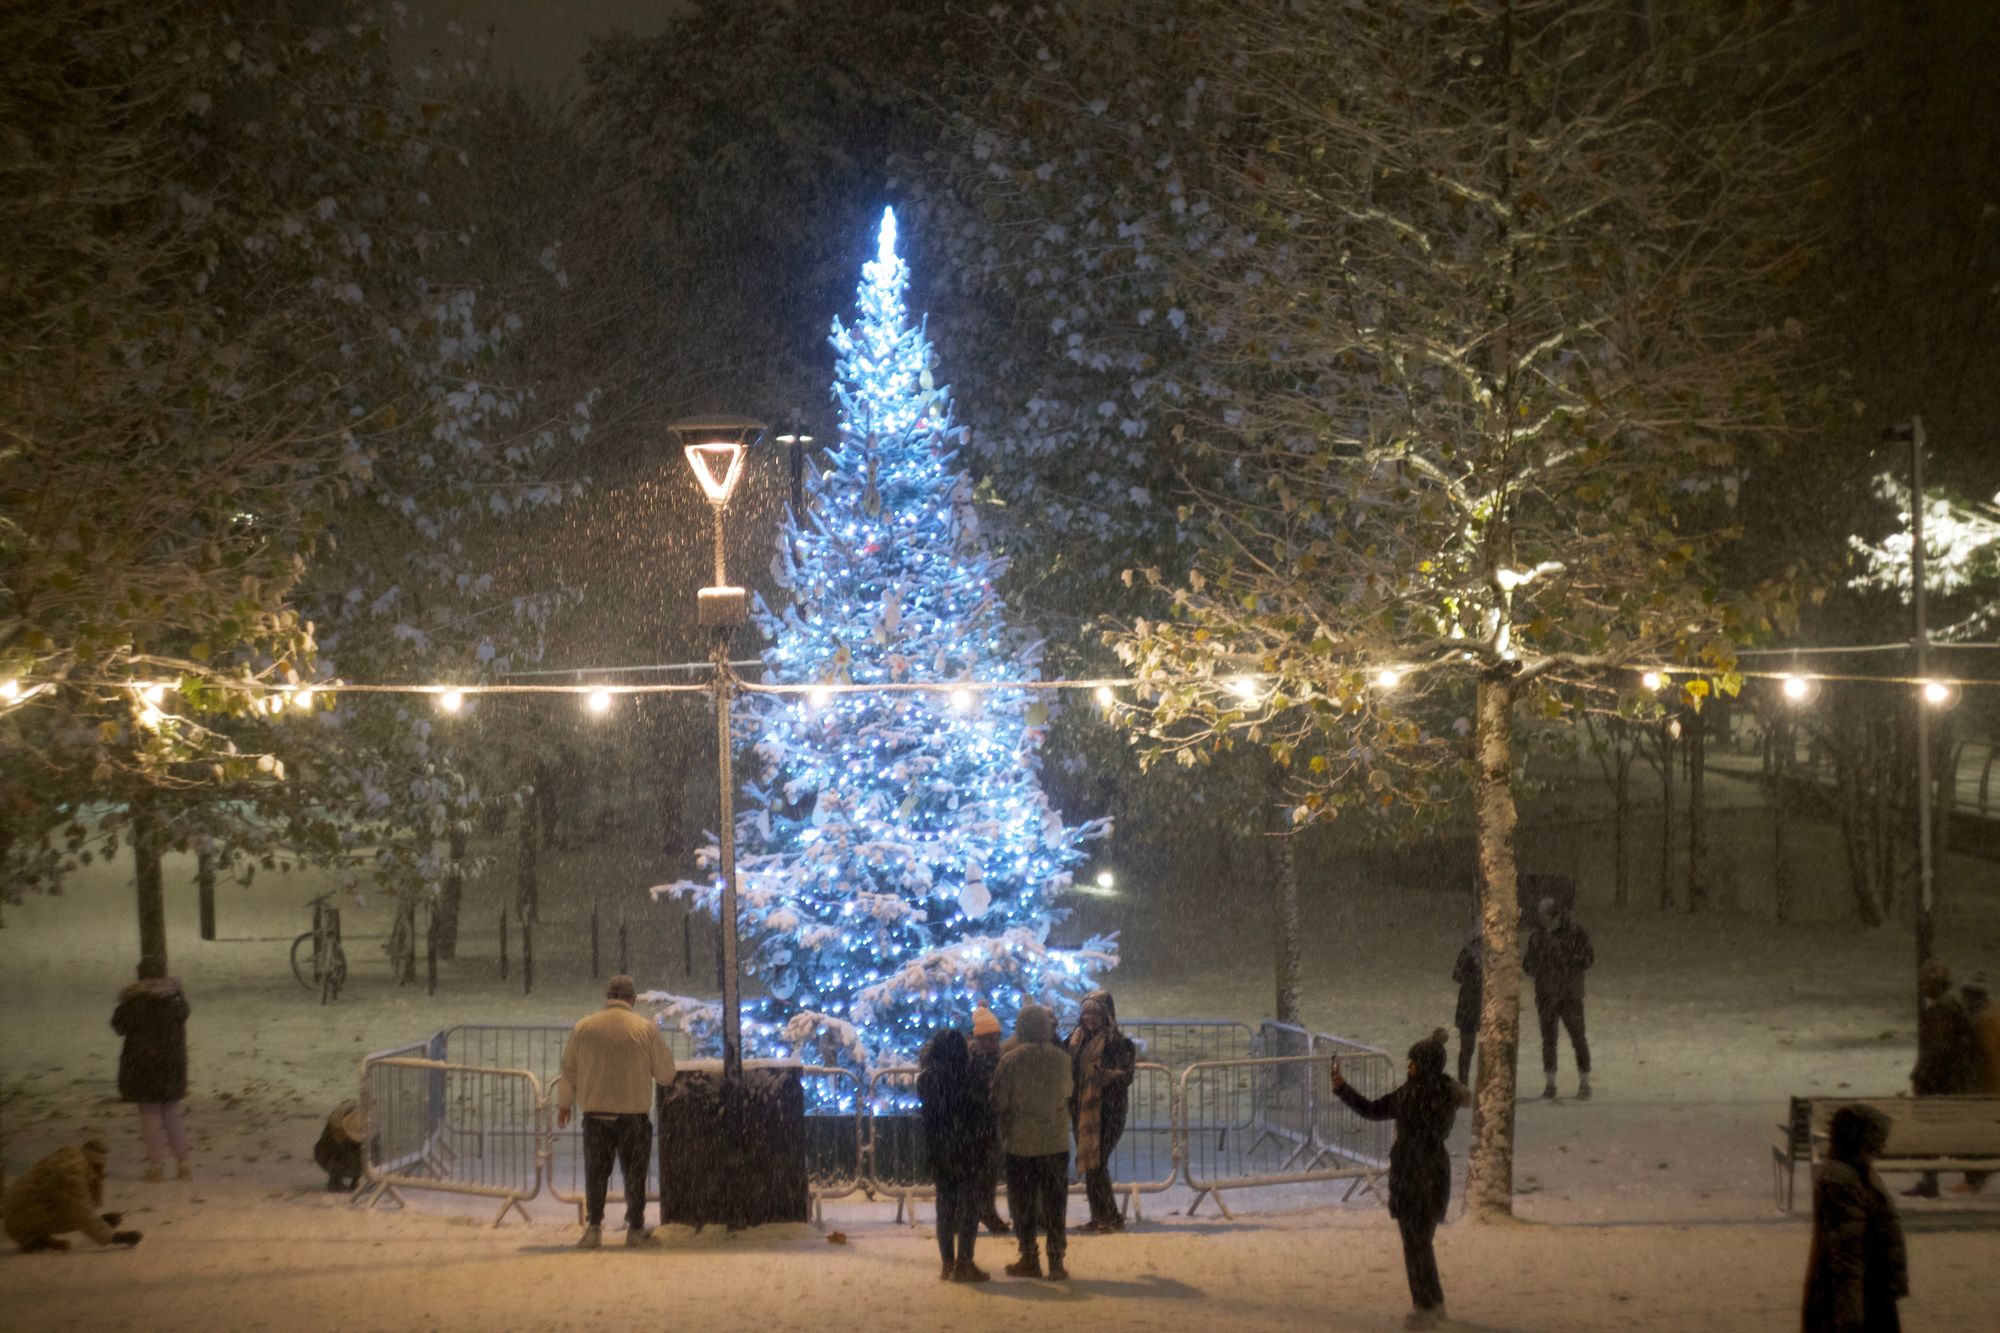 People in a pedestrian area gathered around a large Christmas tree lit in blue. Some people are talking photographs through protective barriers.